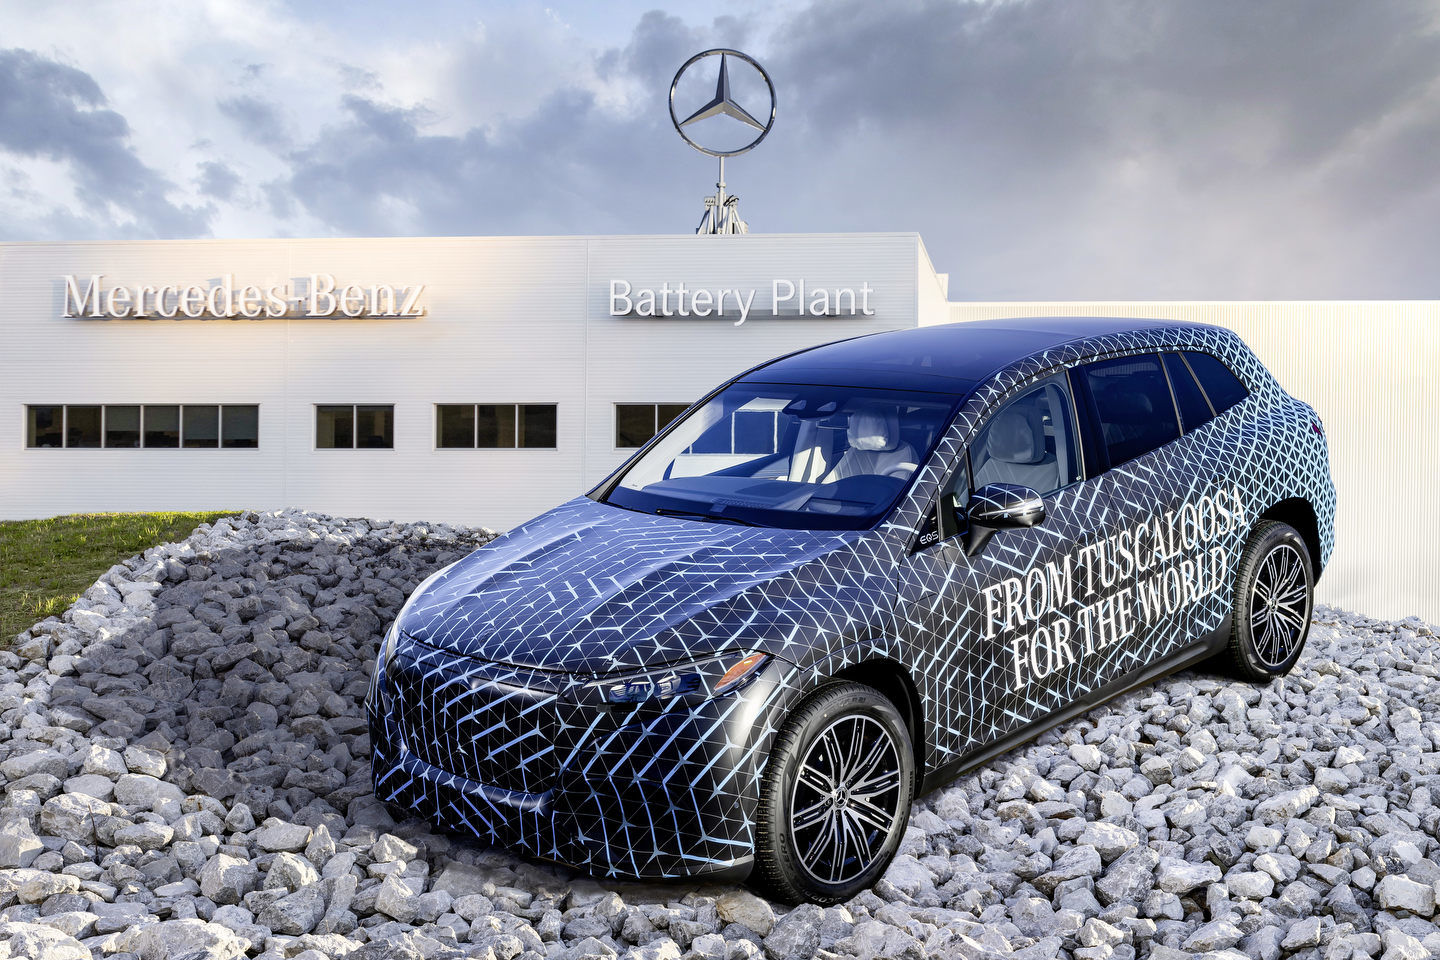 The all-new Mercedes-EQ EQS SUV is the latest Mercedes-Benz electric vehicle coming to the market